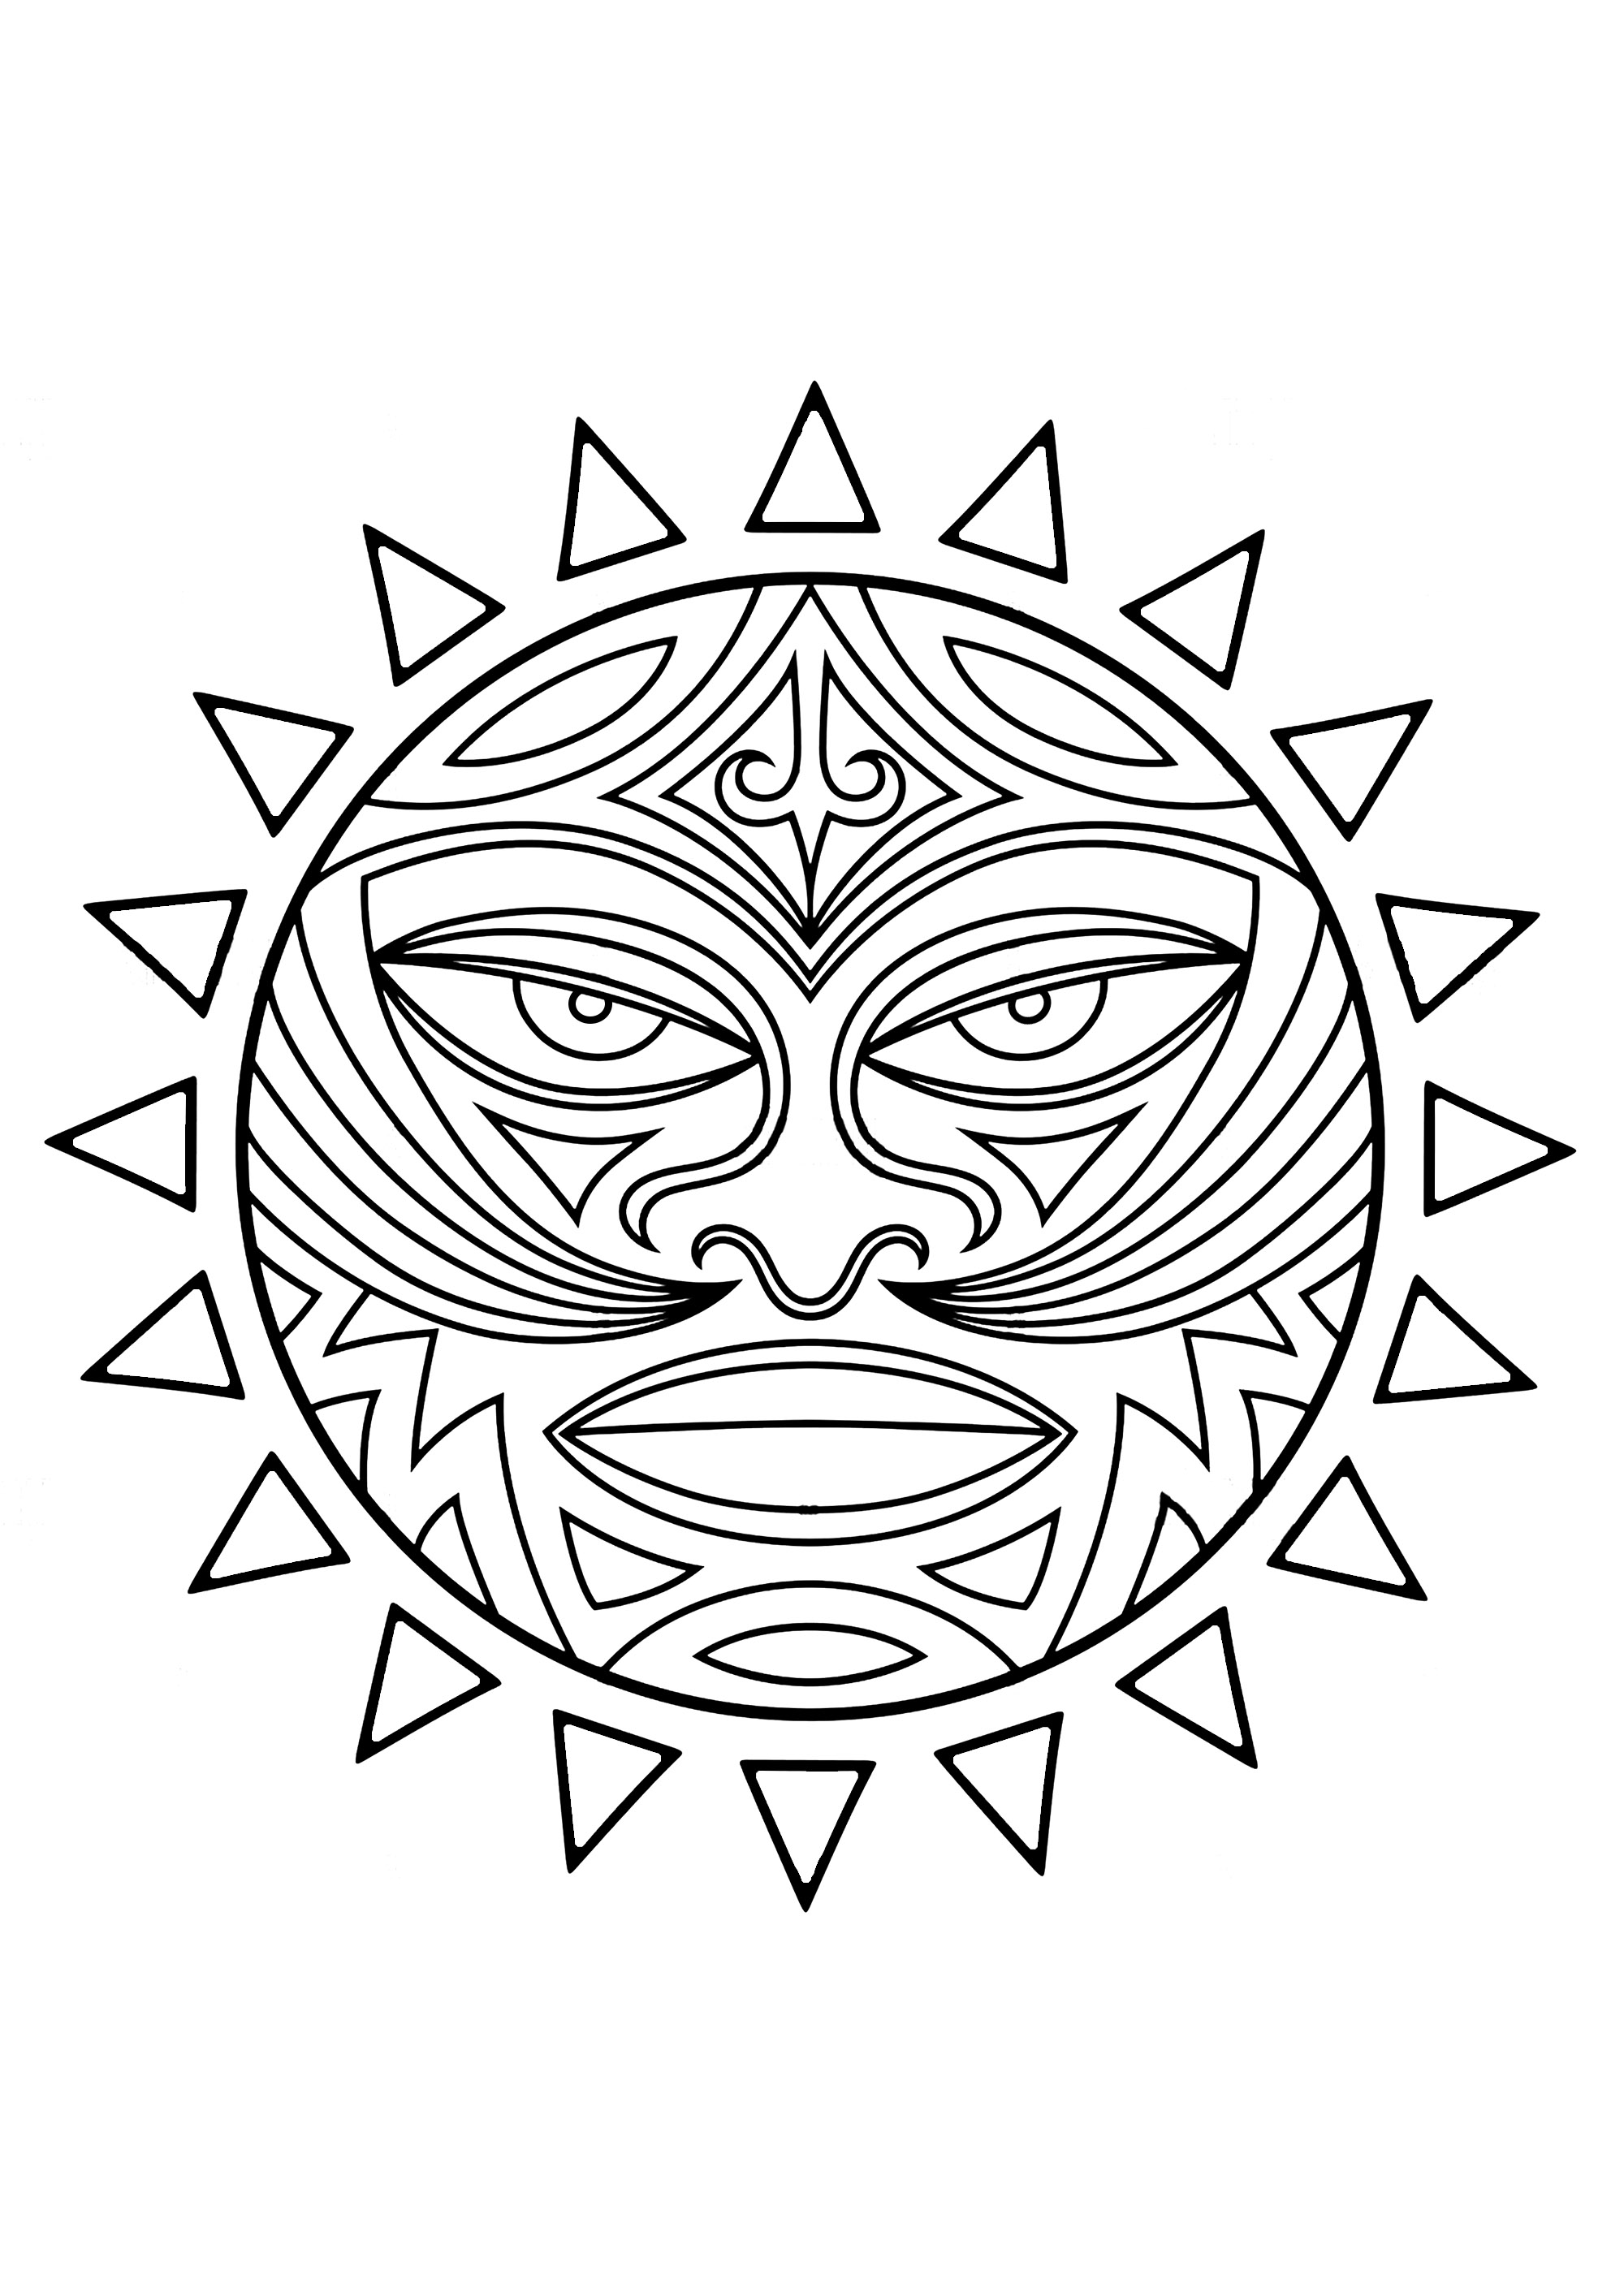 Tiki: Maori / Polynesian symbol. Half-man, half-god, the Tiki symbolizes a mythical character who, according to the customs and beliefs of the peoples of Polynesia, gave birth to the Human being. In the past, Polynesians revered and feared them. This representation in the form of a face in a circle can be the subject of a Maori tattoo.